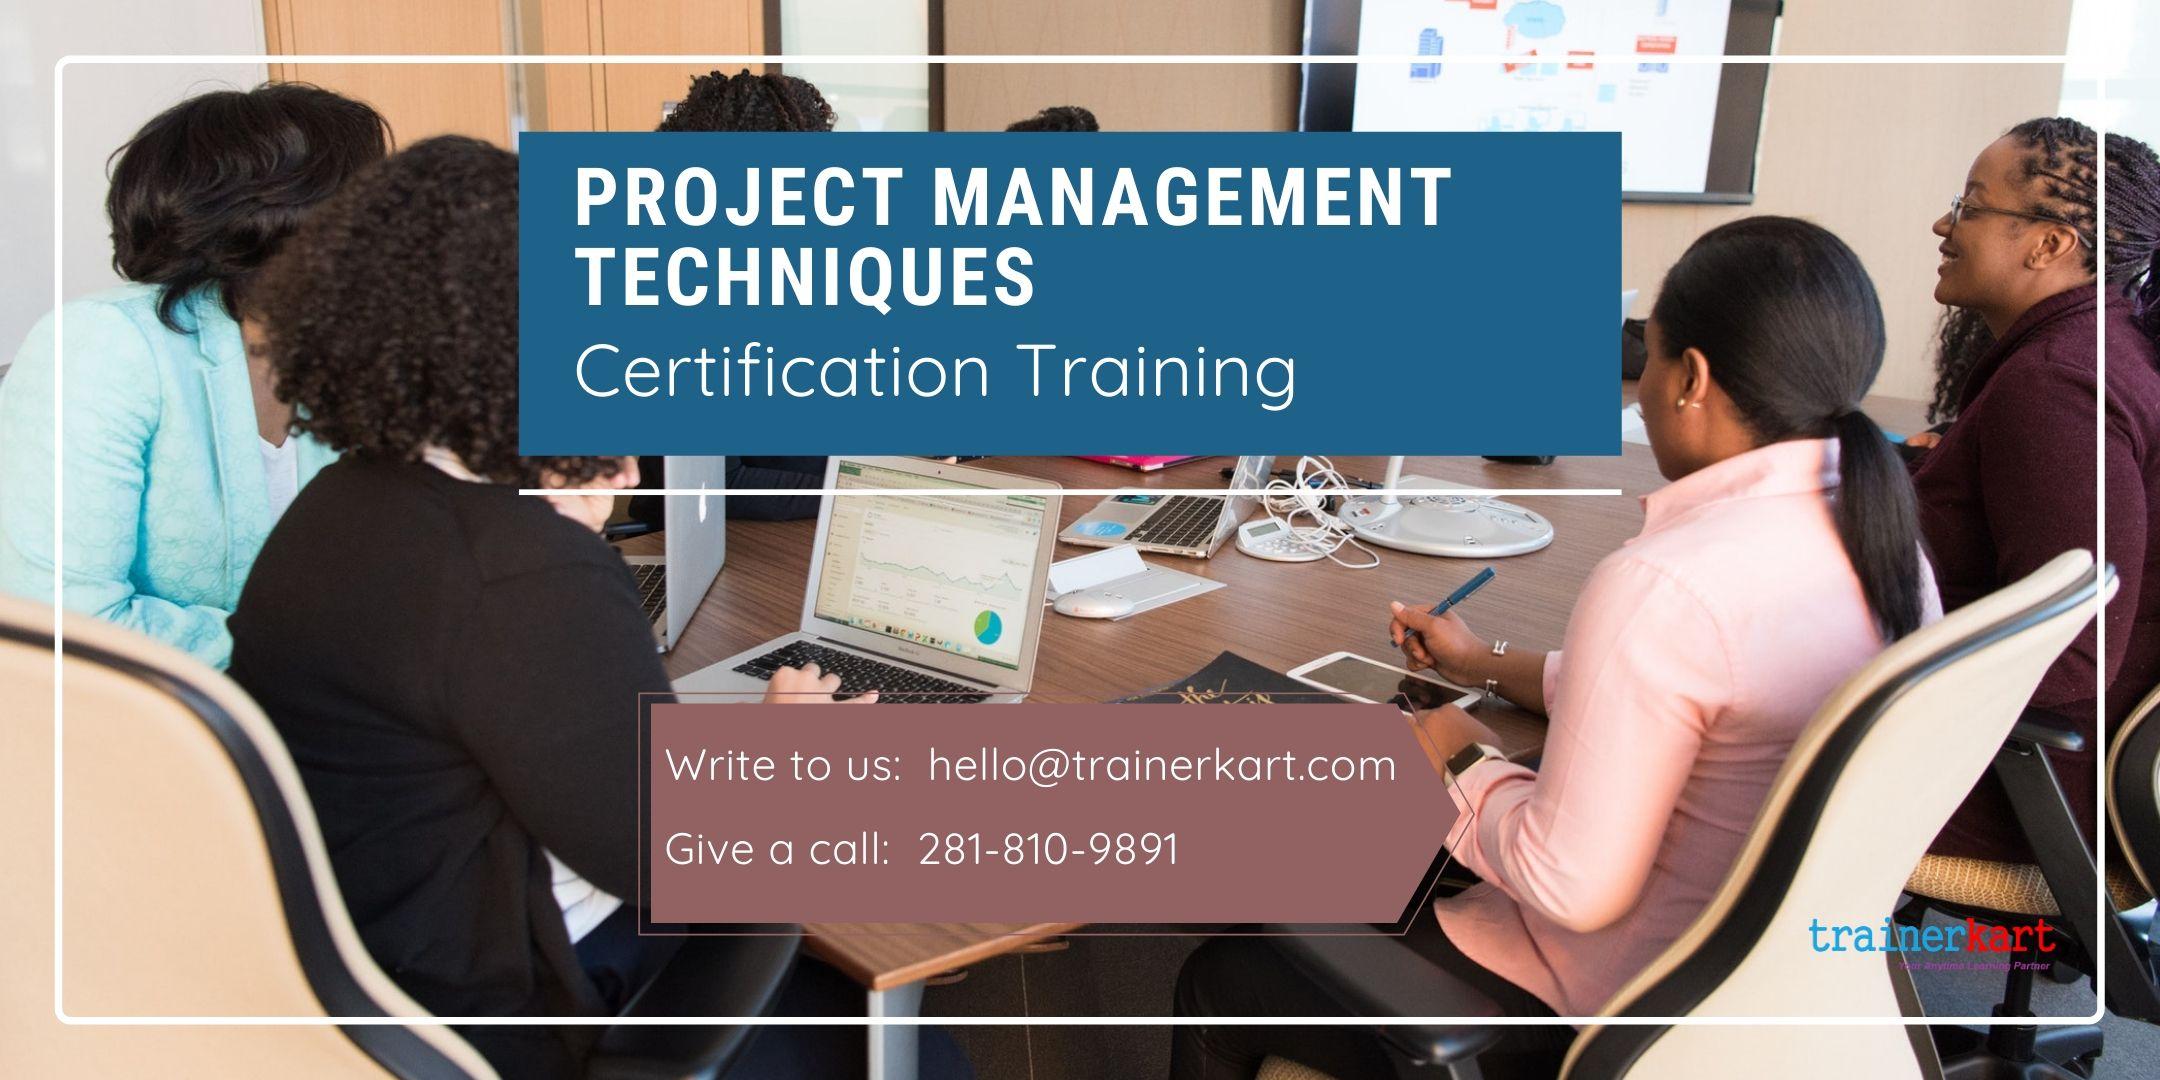 Project Management Techniques Certification Training in Baltimore, MD